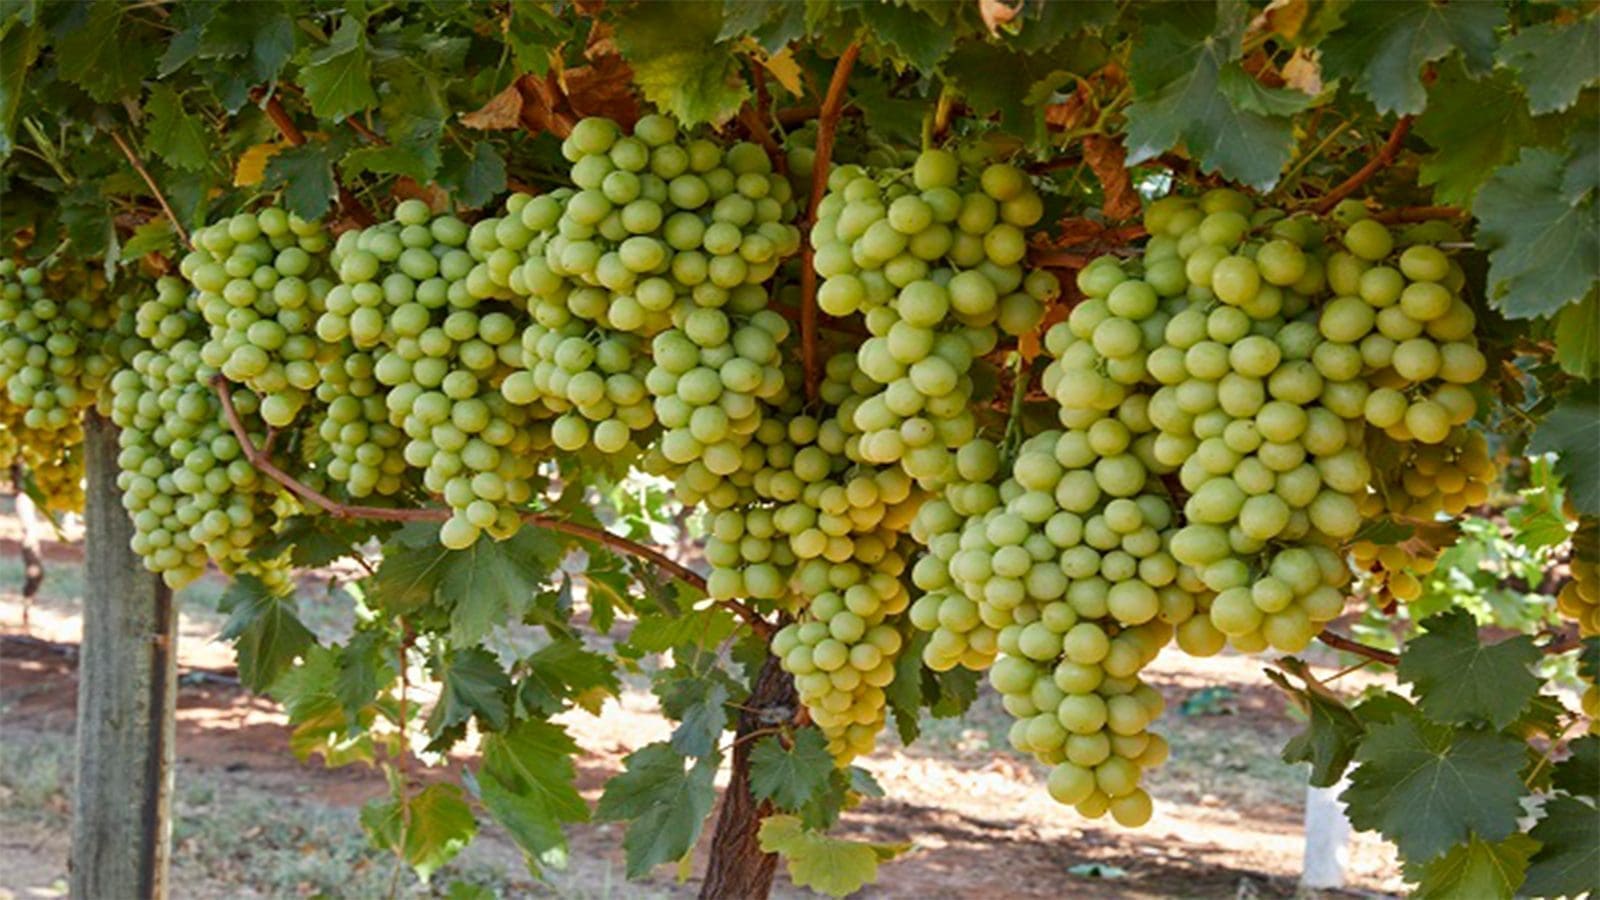 Hazel Technologies’ innovation successfully improves quality of grapes